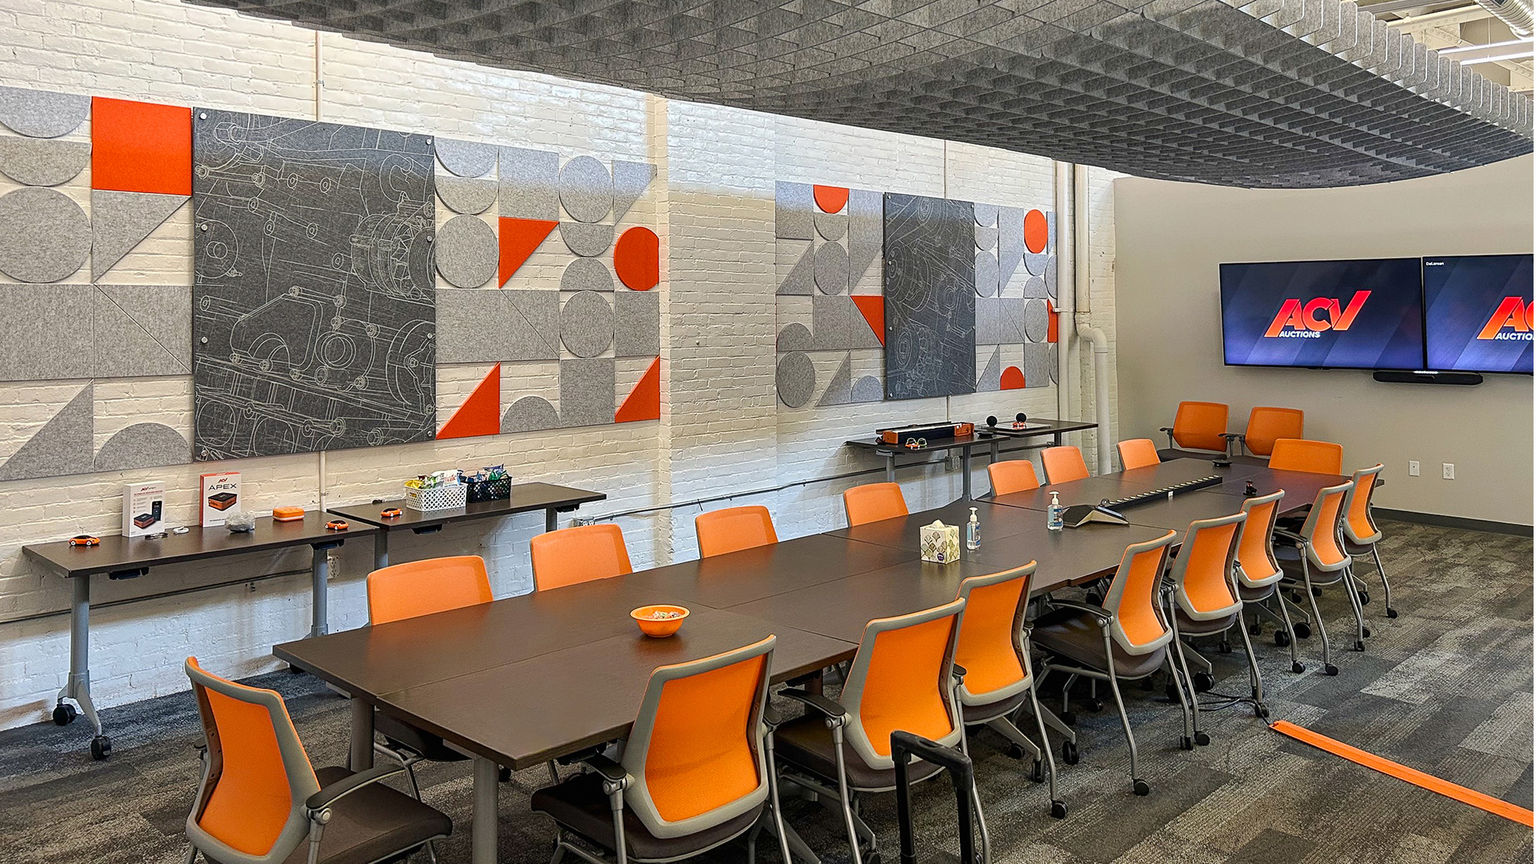 A conference Room with custom printed acoustic panels and an acoustic tile pattern made up of various sahpes and colors.